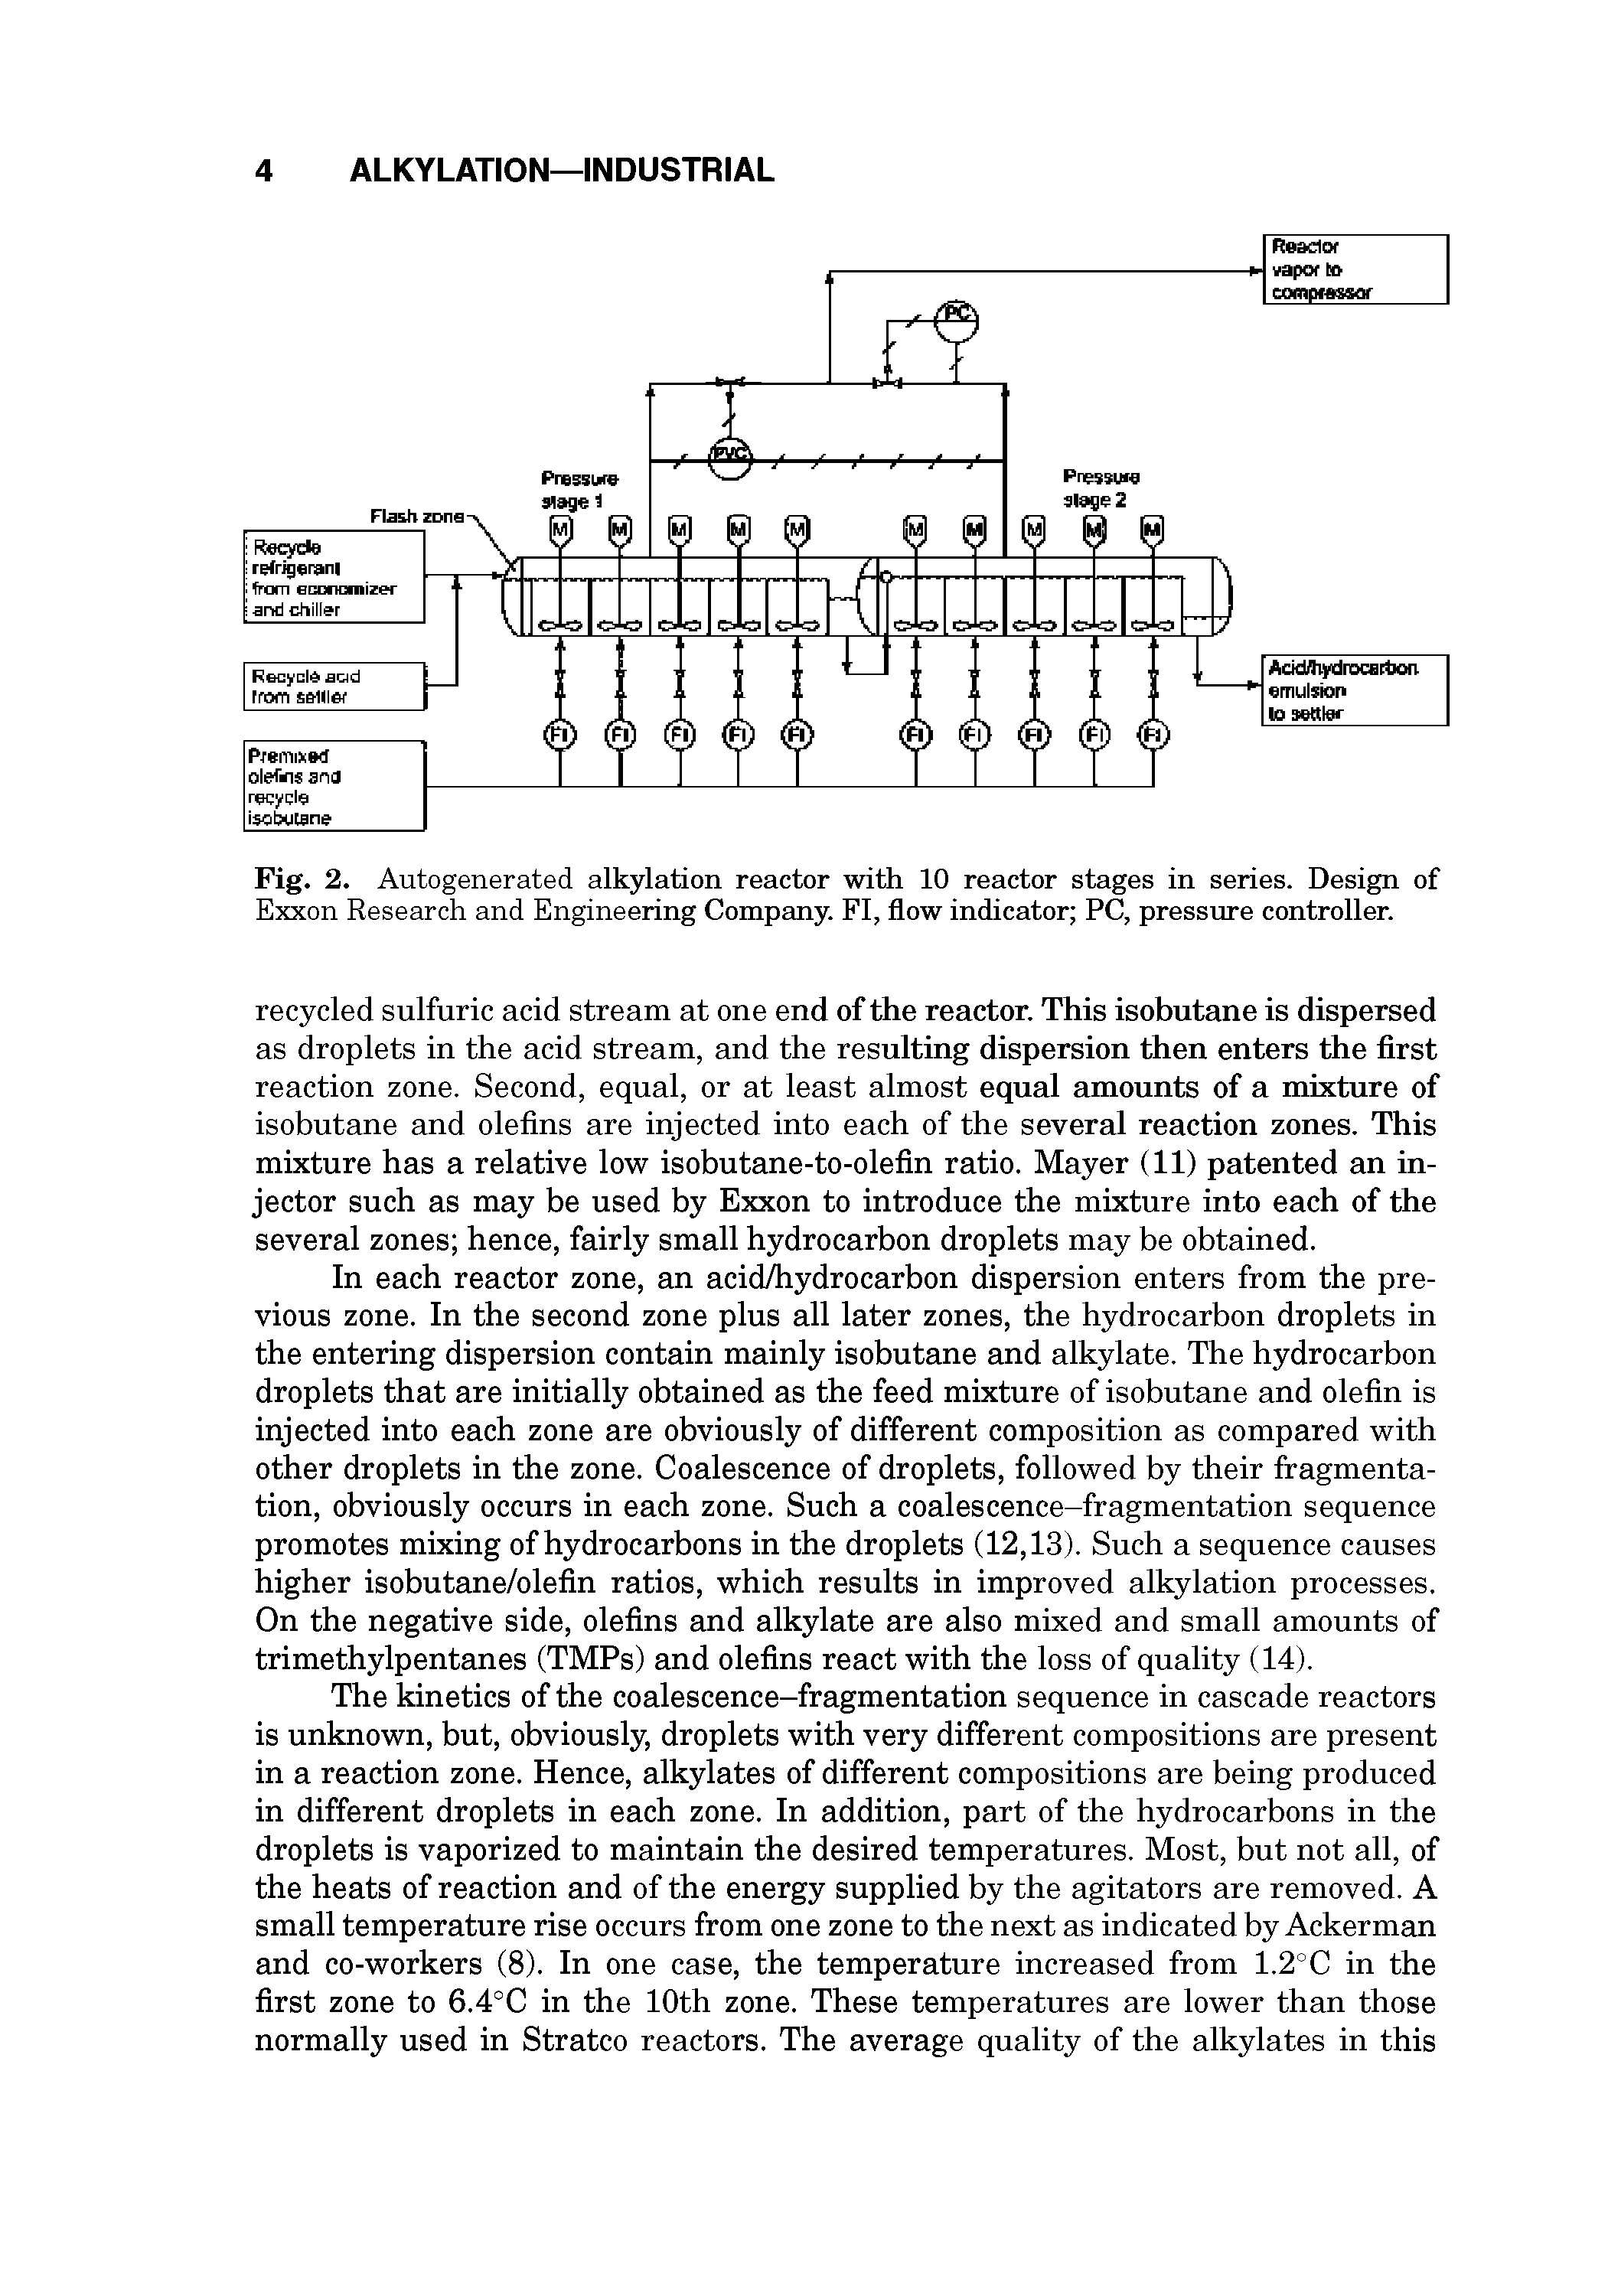 Fig. 2. Autogenerated alkylation reactor with 10 reactor stages in series. Design of Exxon Research and Engineering Company. FI, flow indicator PC, pressure controller.